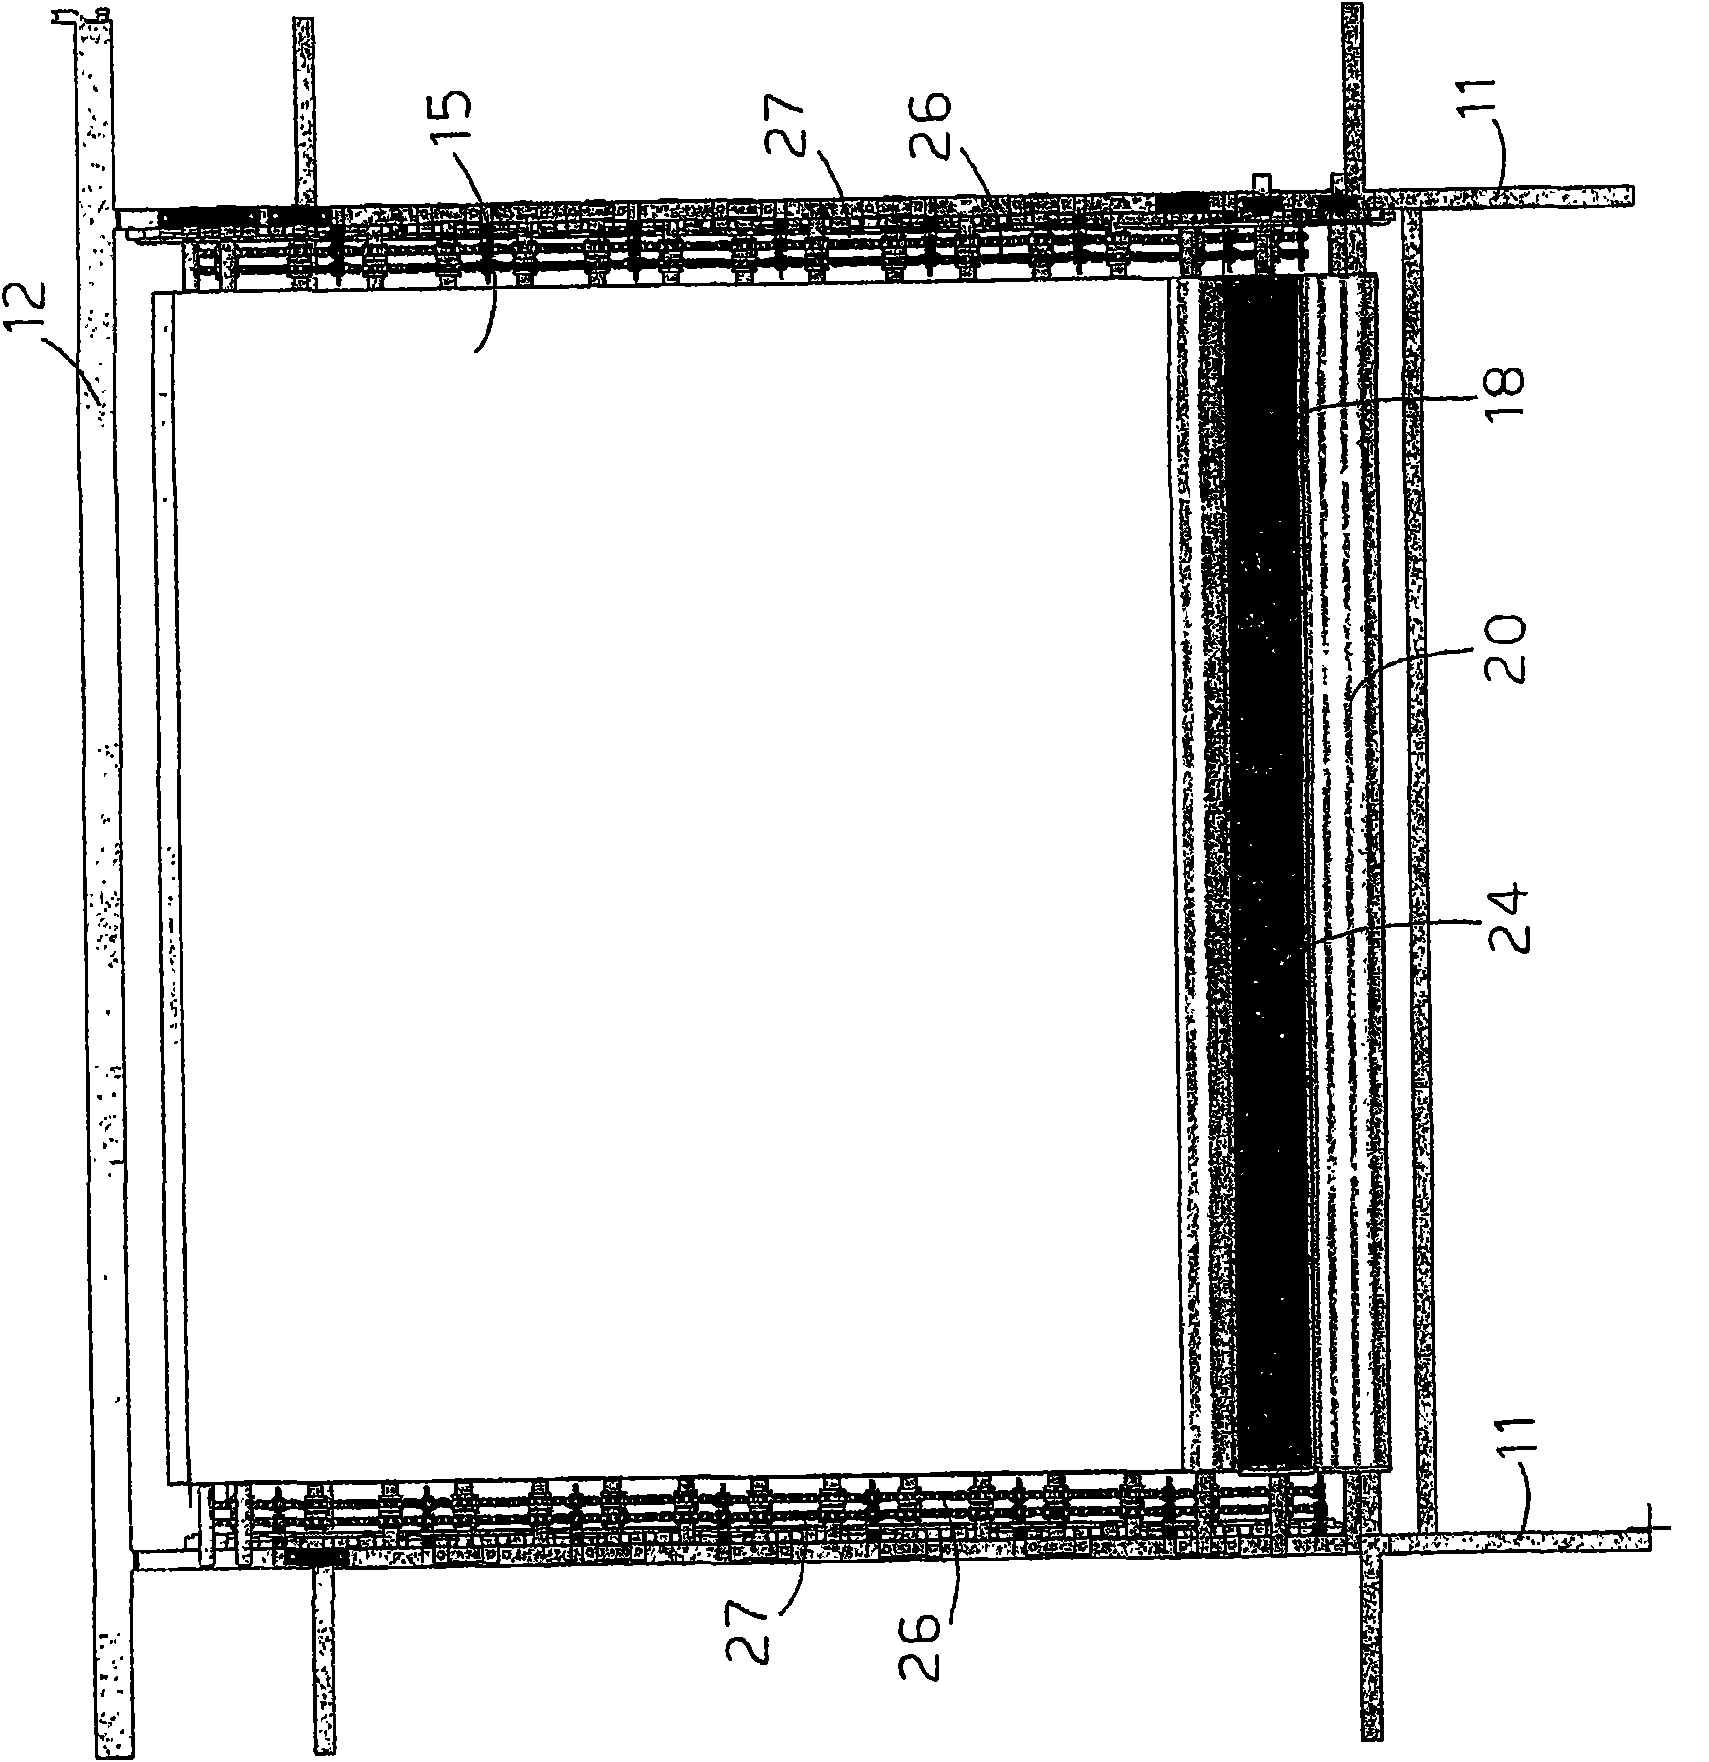 Conveyor apparatus with overlapping conveyor belts for leather, or similar, drying plants, or treatment plants in general, in controlled environments